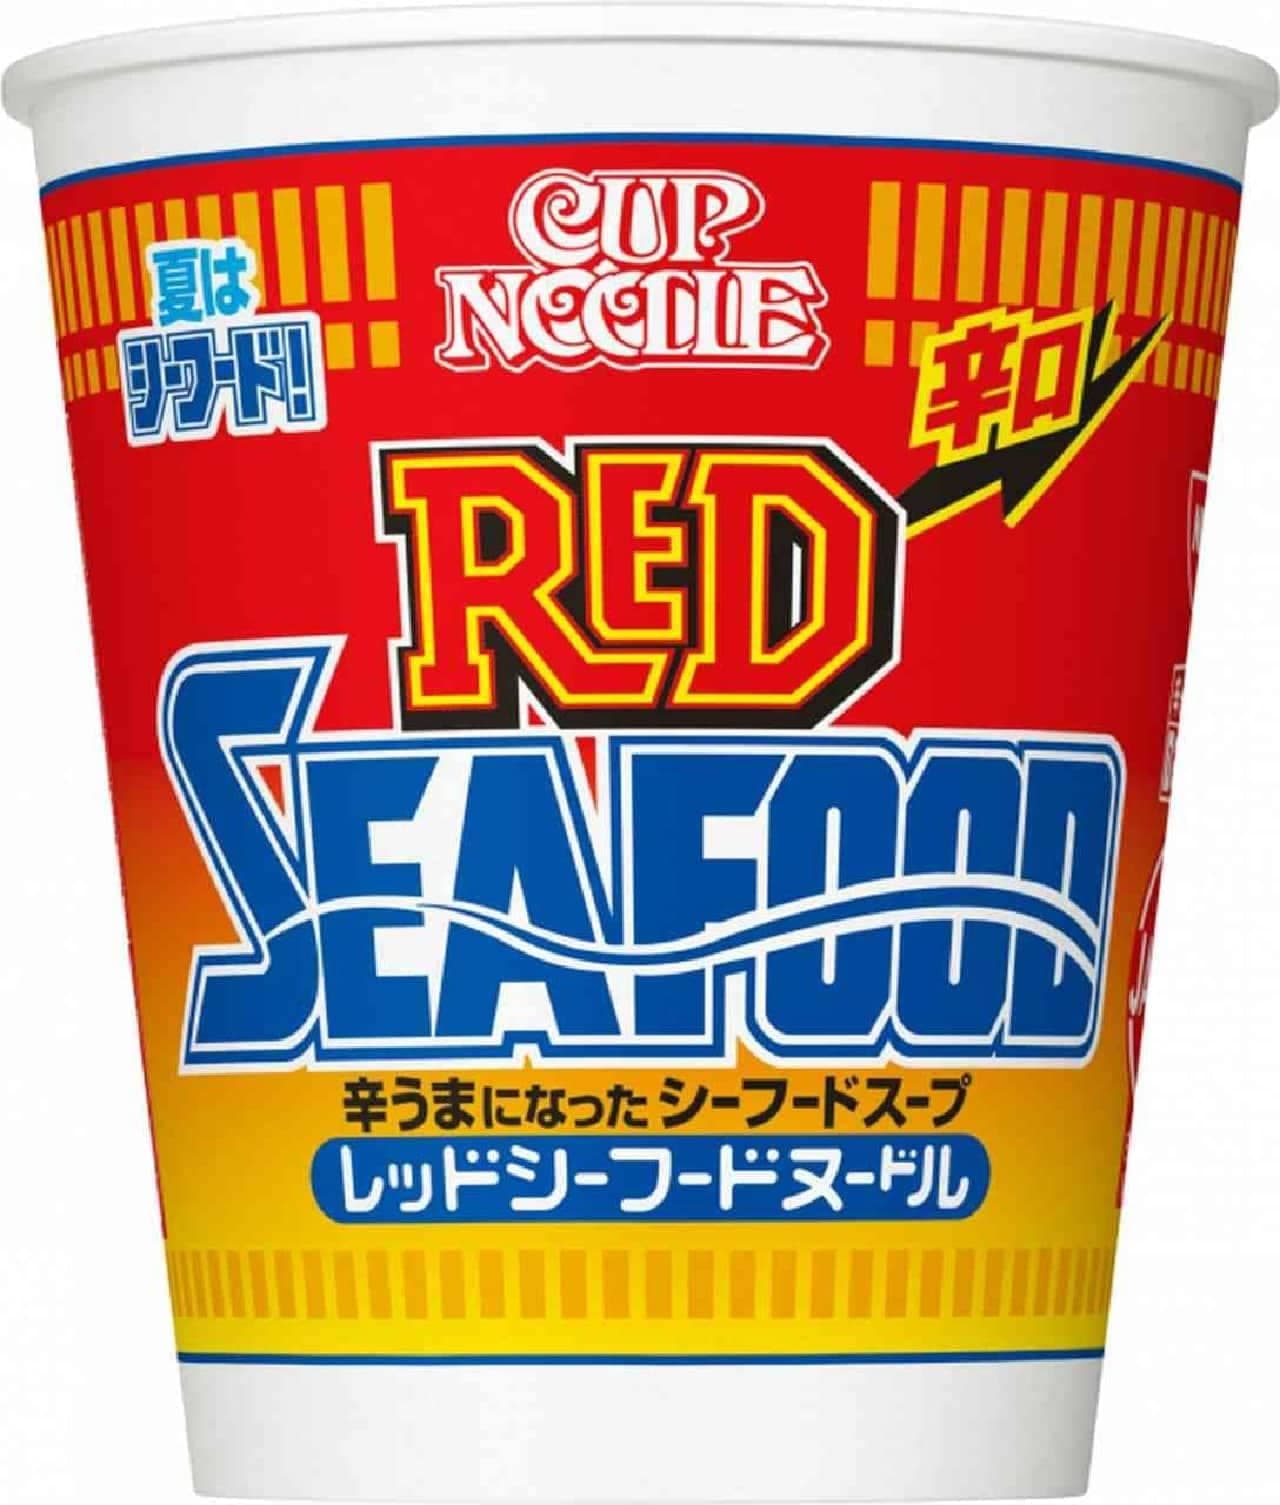 Cup Noodle Red Seafood Noodle